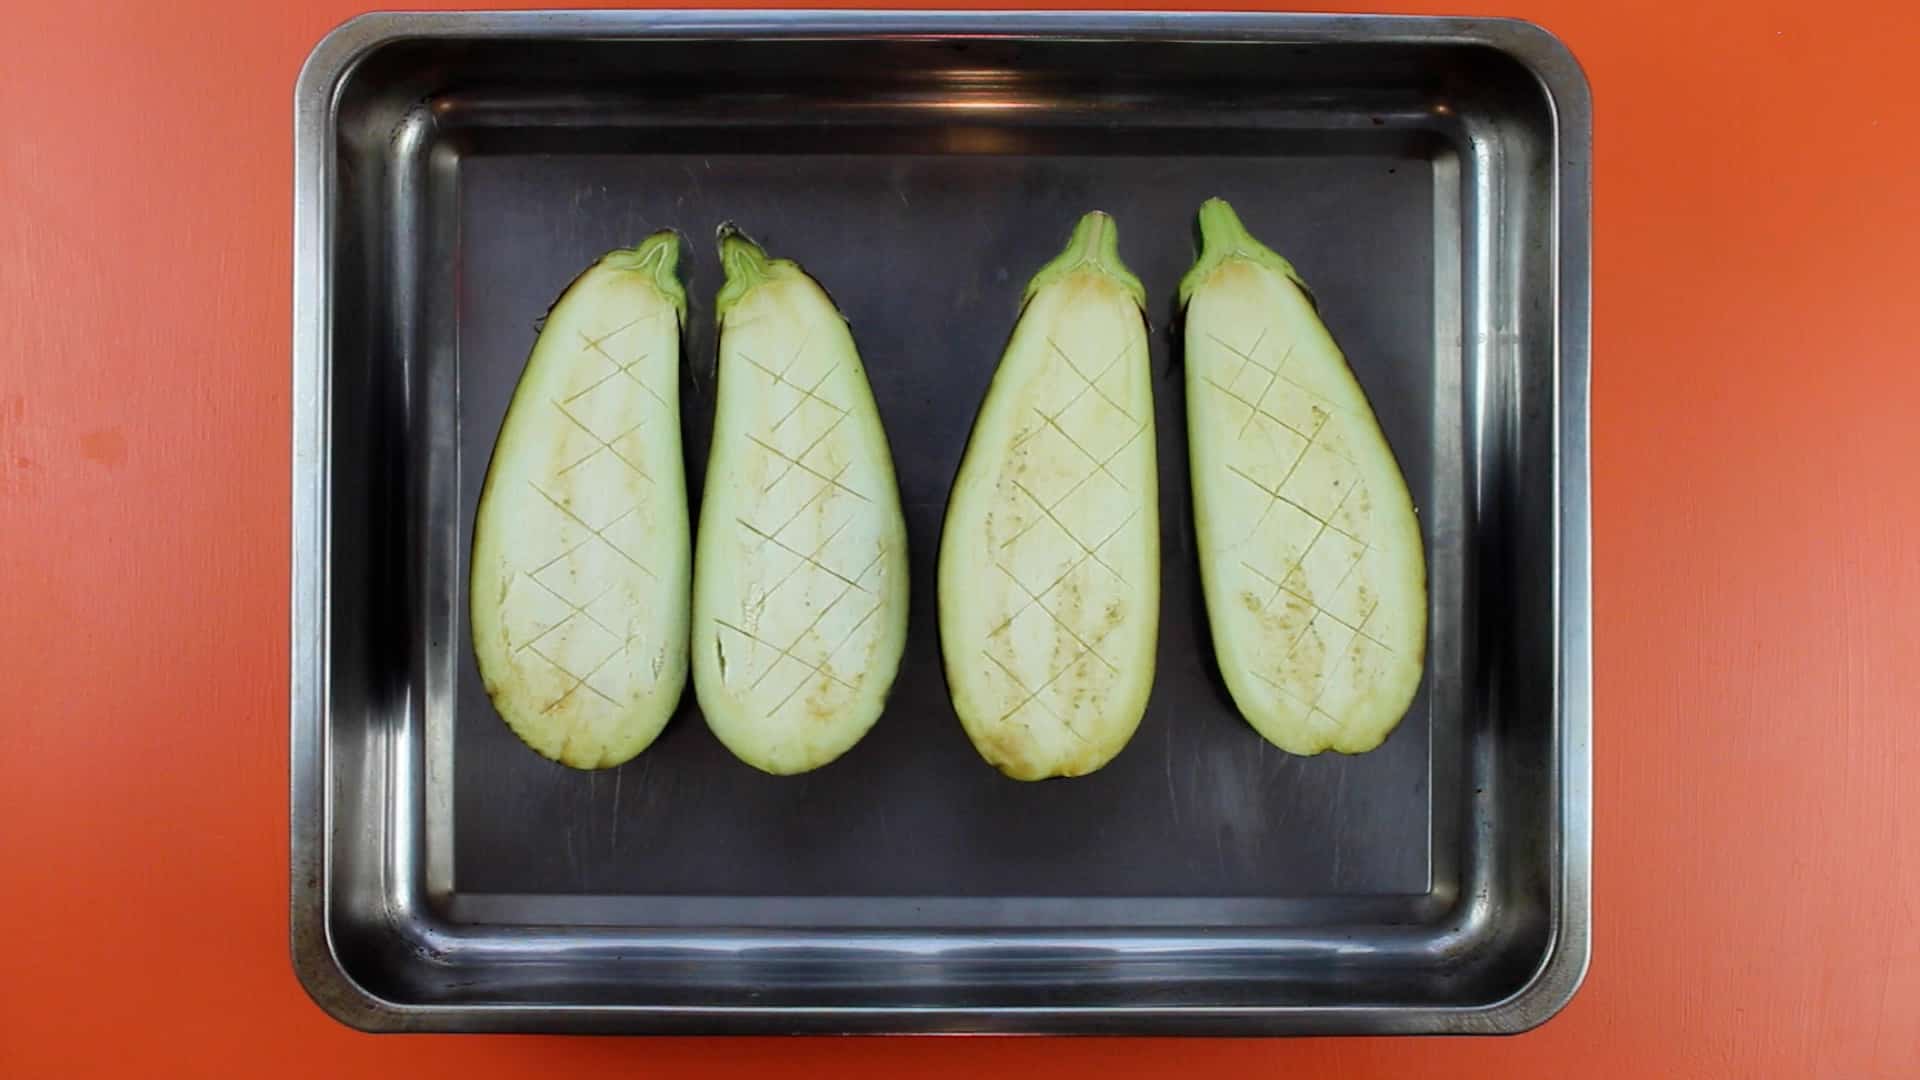 2 aubergines cut in half and scored on baking tray